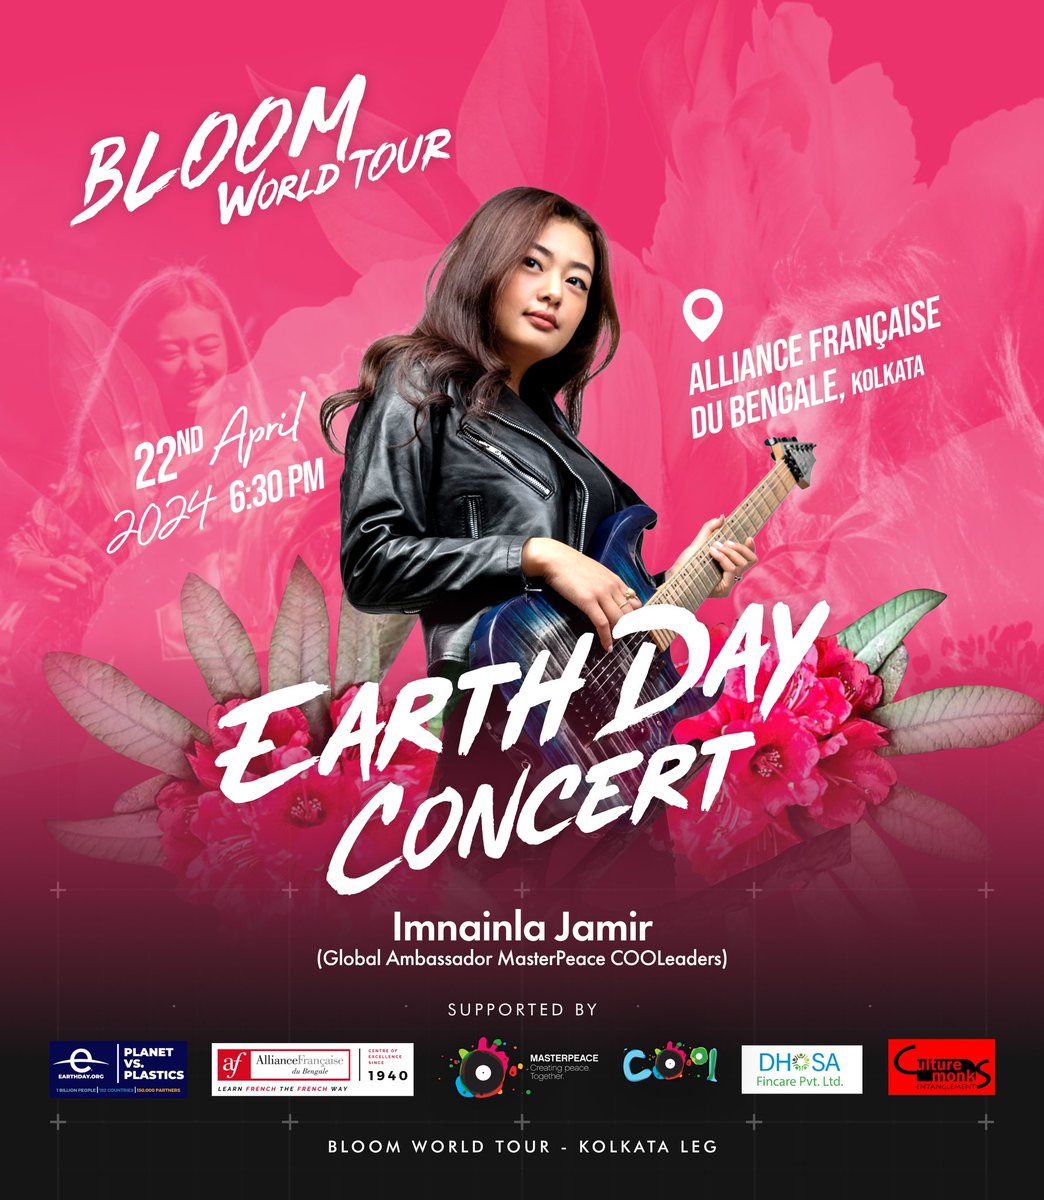 I am honoured to be part of the #EarthDayConcert being hosted by @AFduBengale @earthdayindia @Masterpeace2014 @culturemonks on April 22. Let’s continue to cool down our planet earth. Always remember, CoolEarth means CoolYou -Concert Registration link: bit.ly/earthdayconcer…